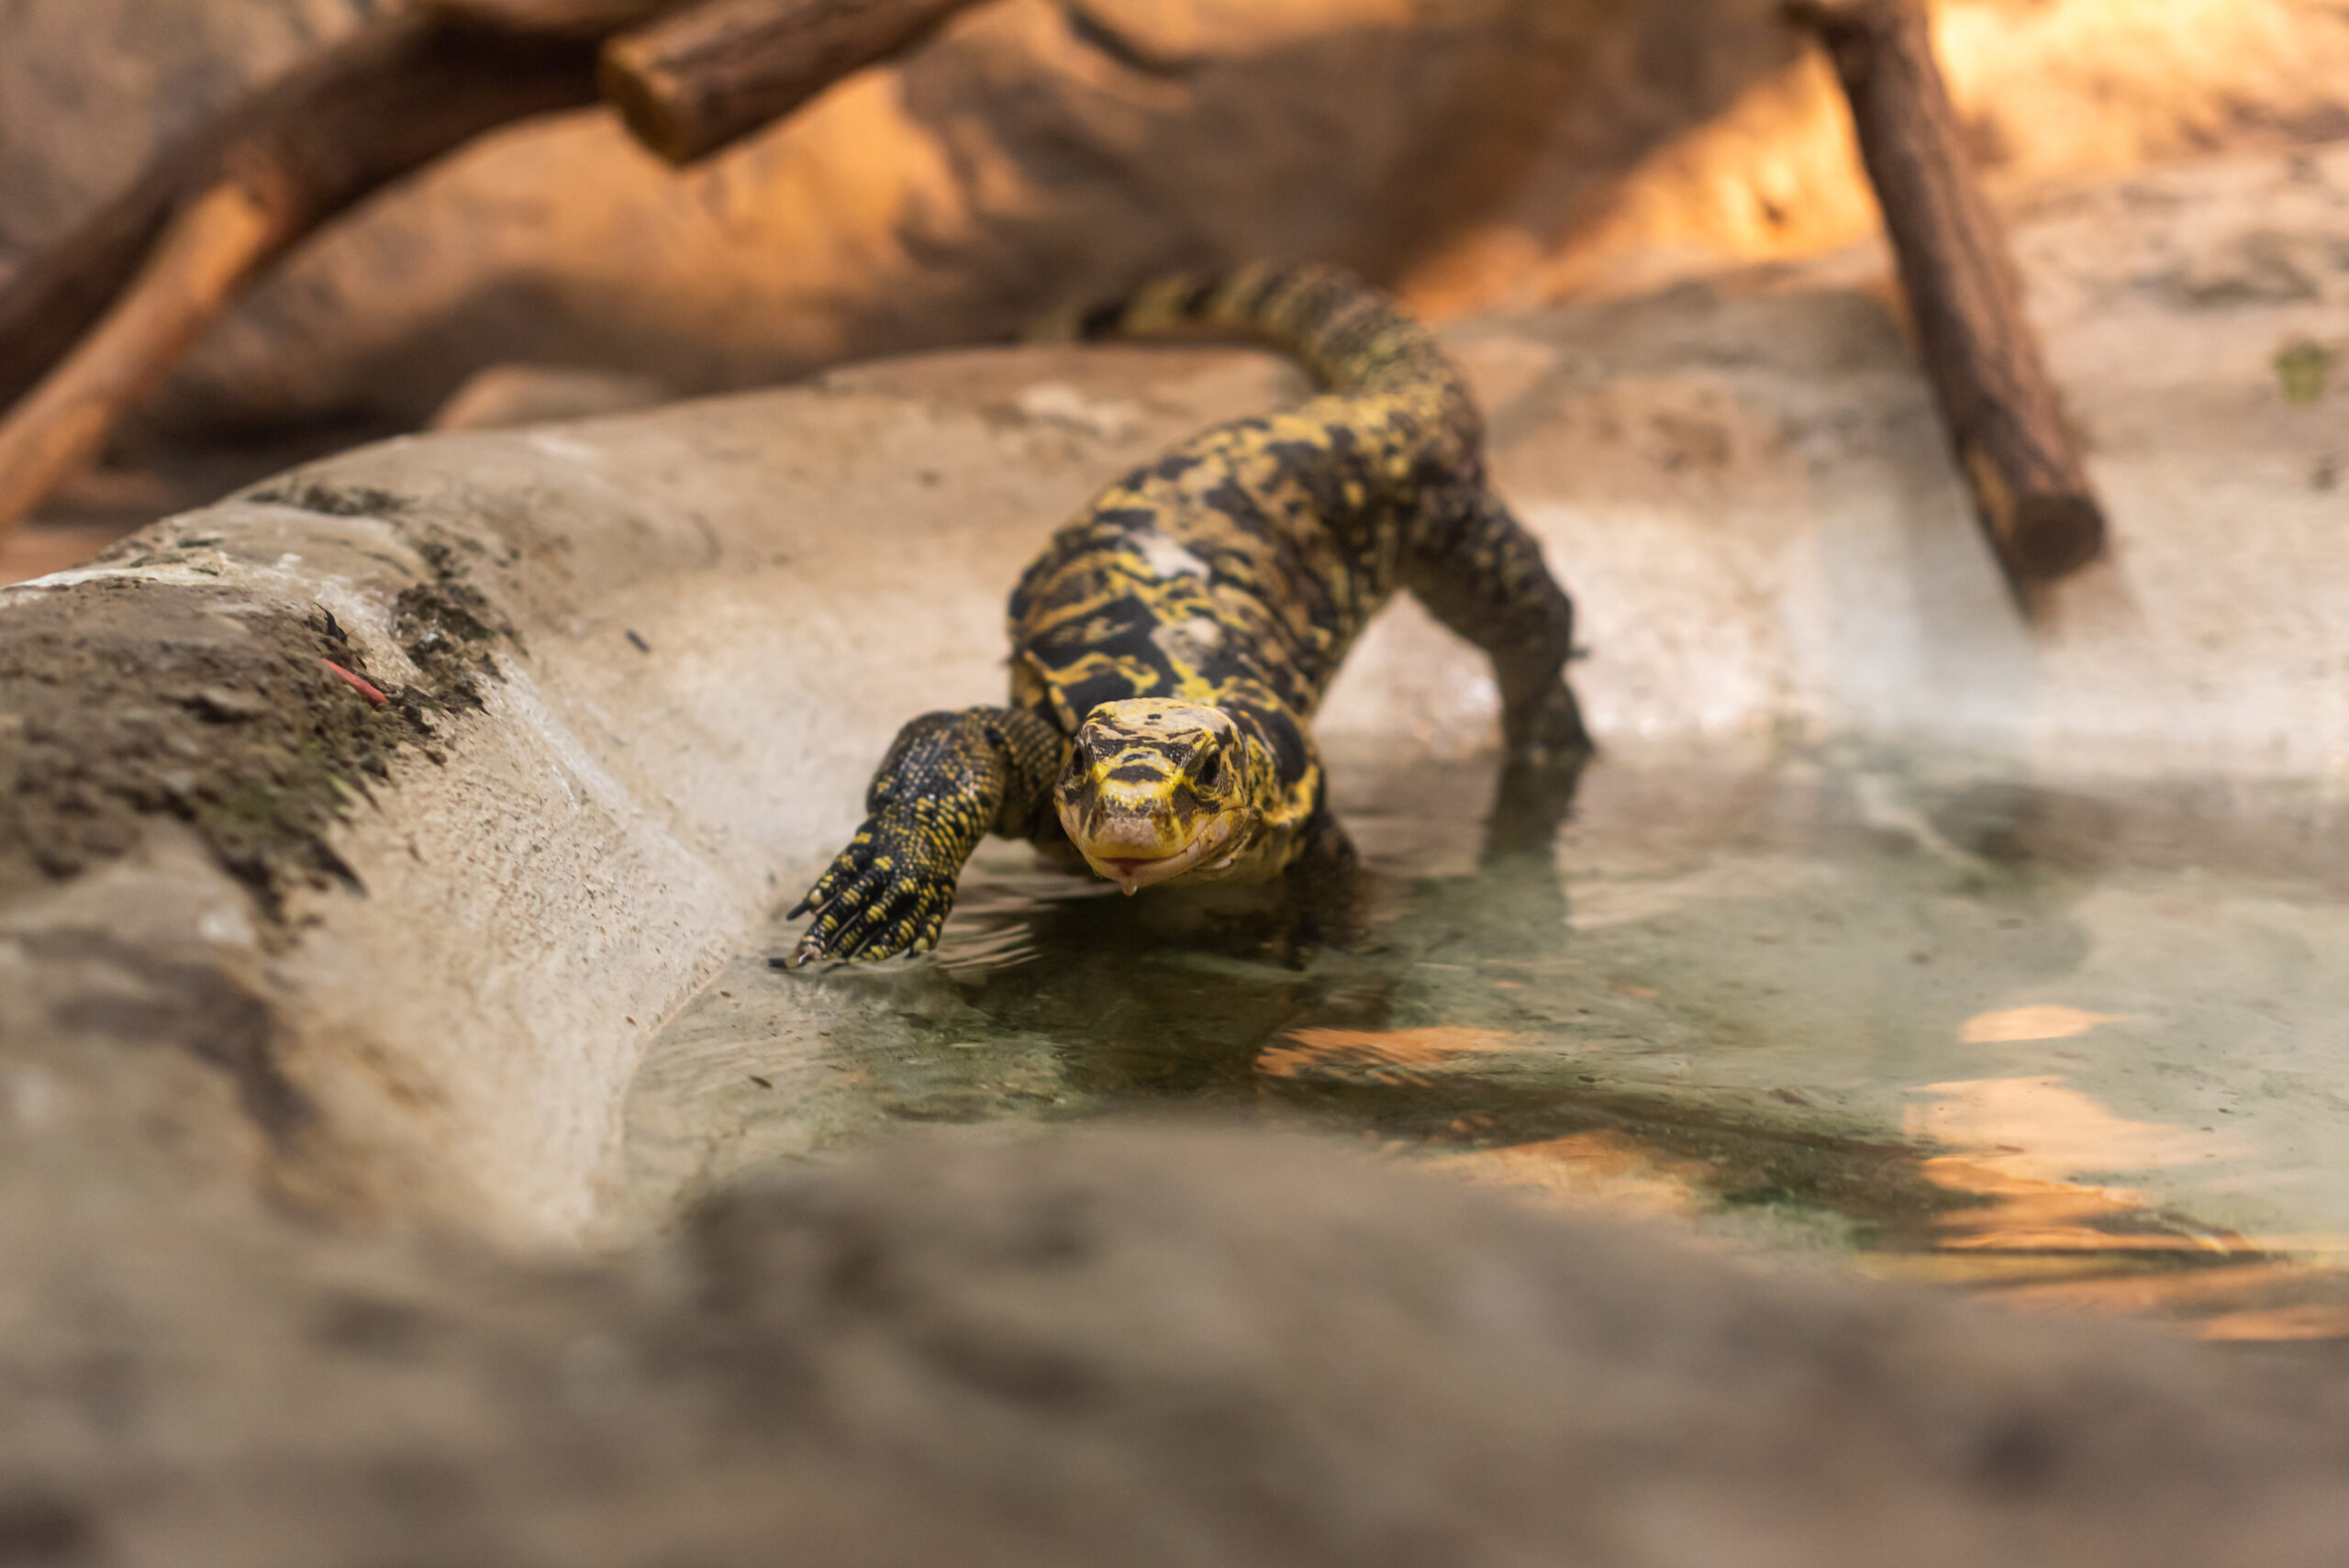 Most reptile experts recommend cleaning the enclosure on a regular basis. Here are some general recommendations!